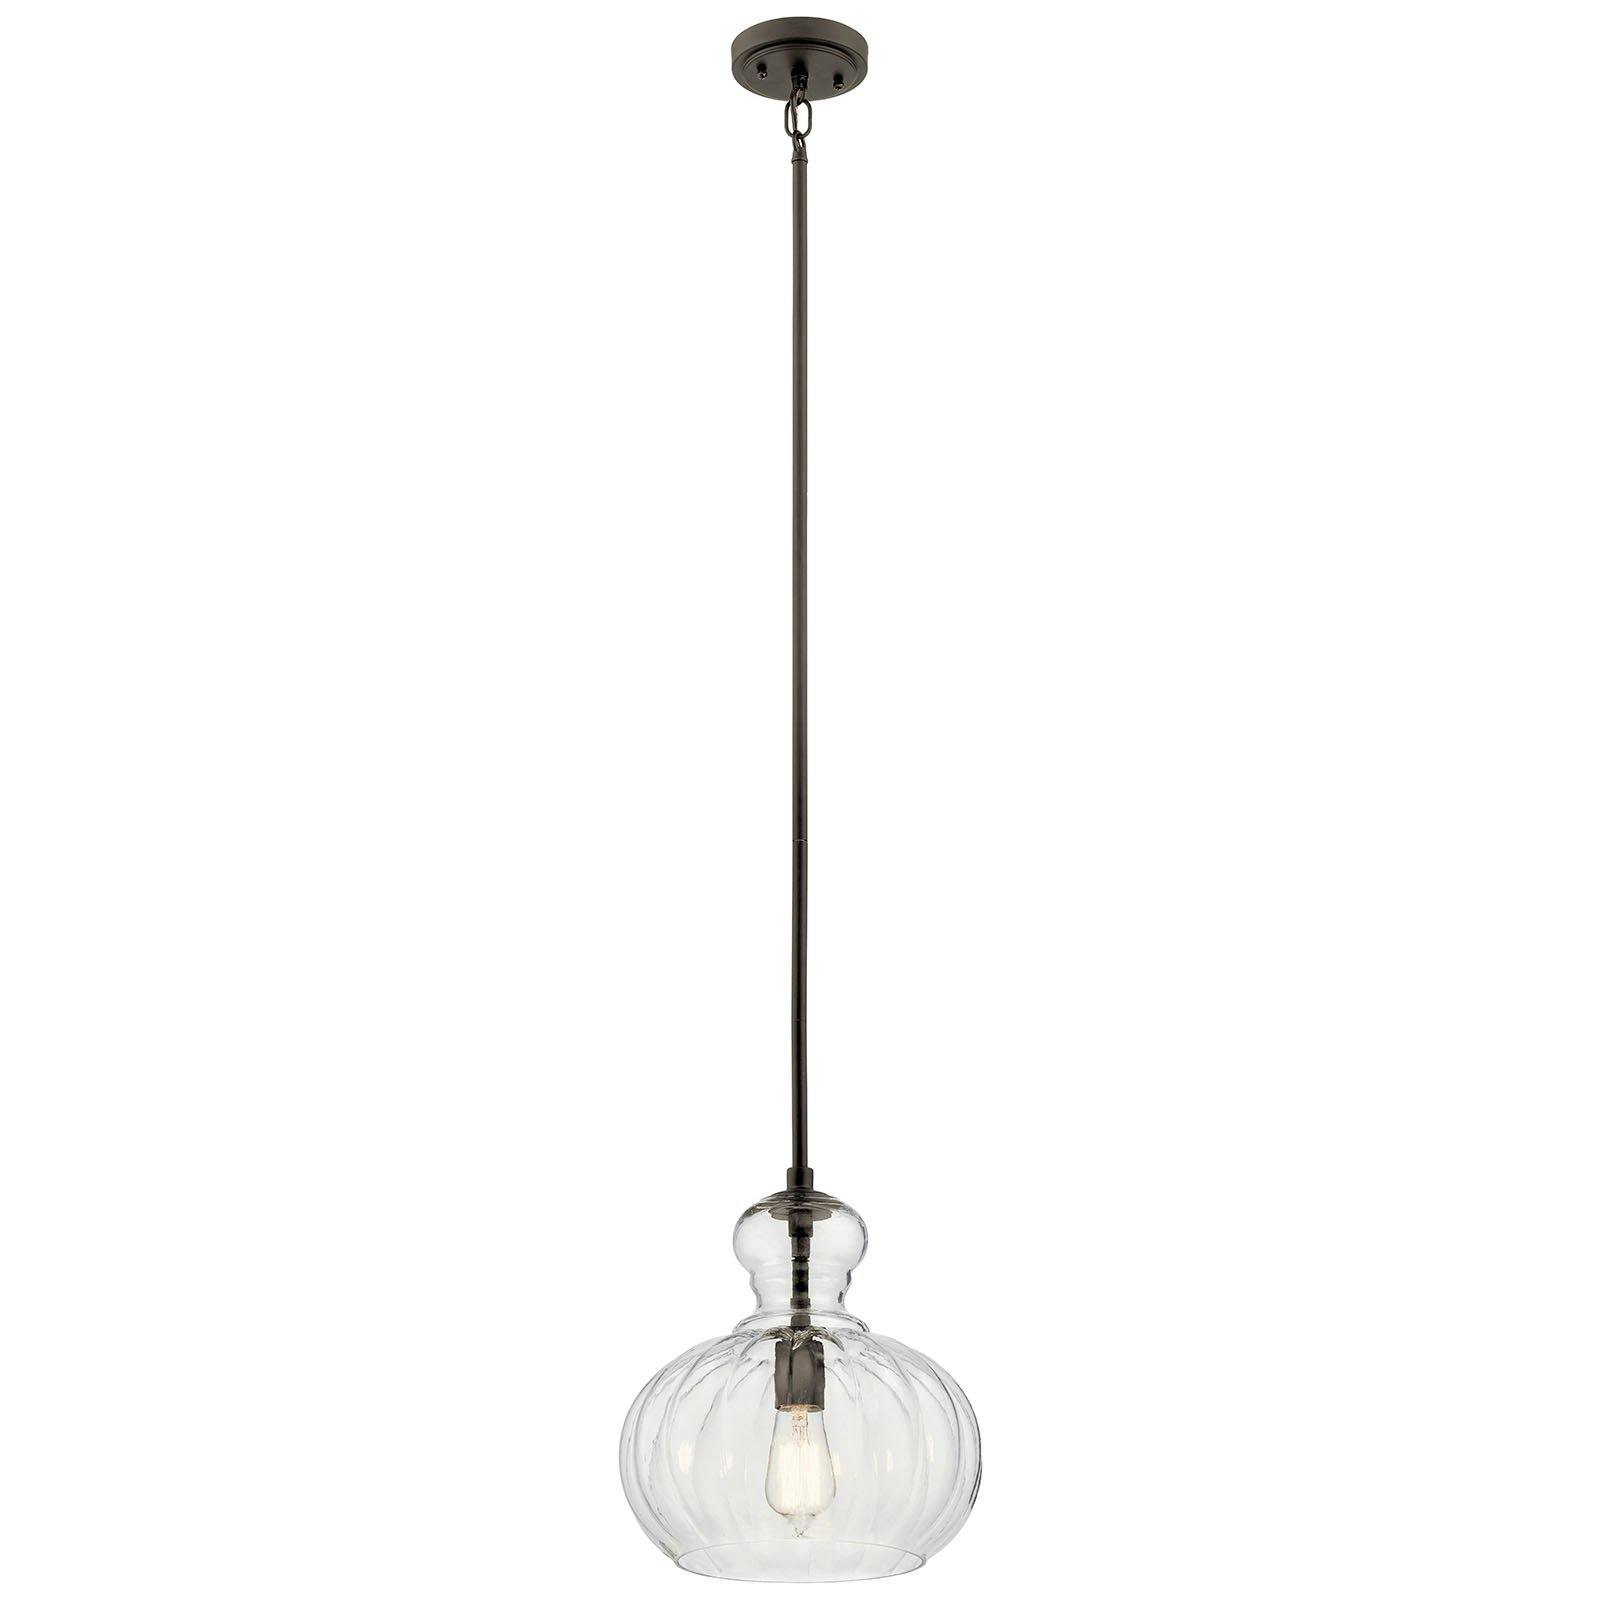 Riviera 13" Pendant in Olde Bronze on a white background